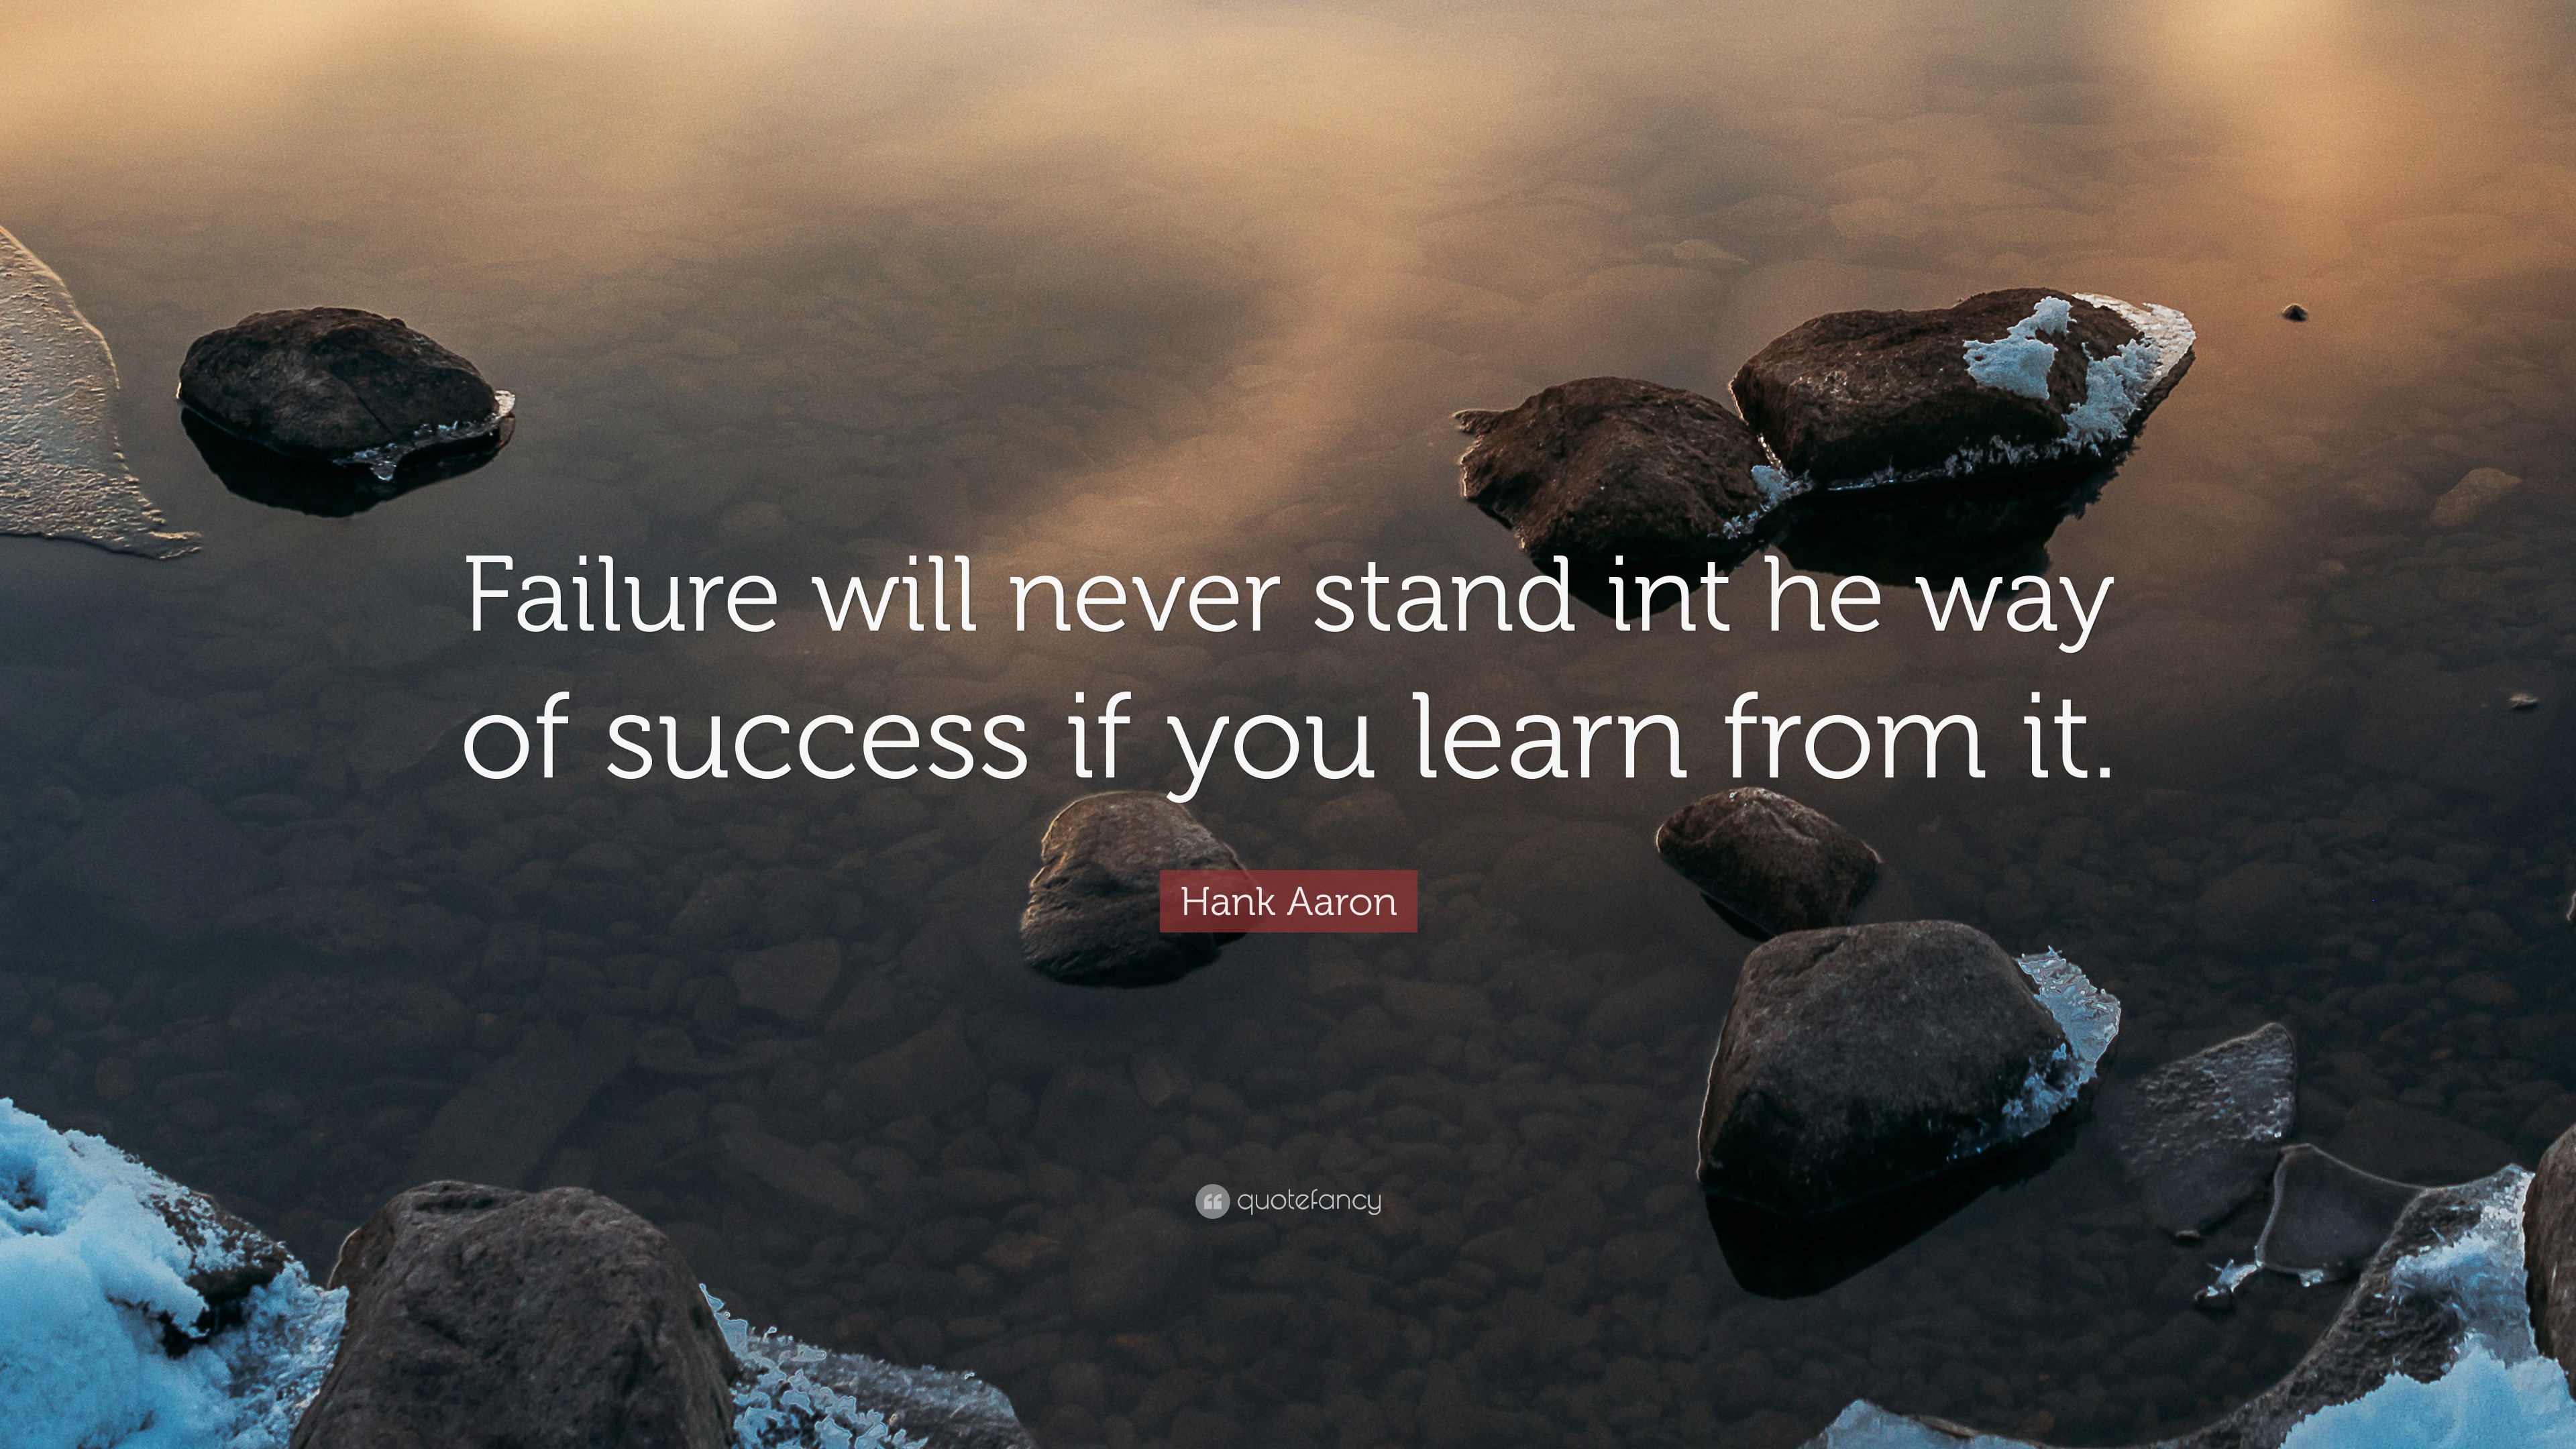 Hank Aaron Quote: “Failure will never stand int he way of success